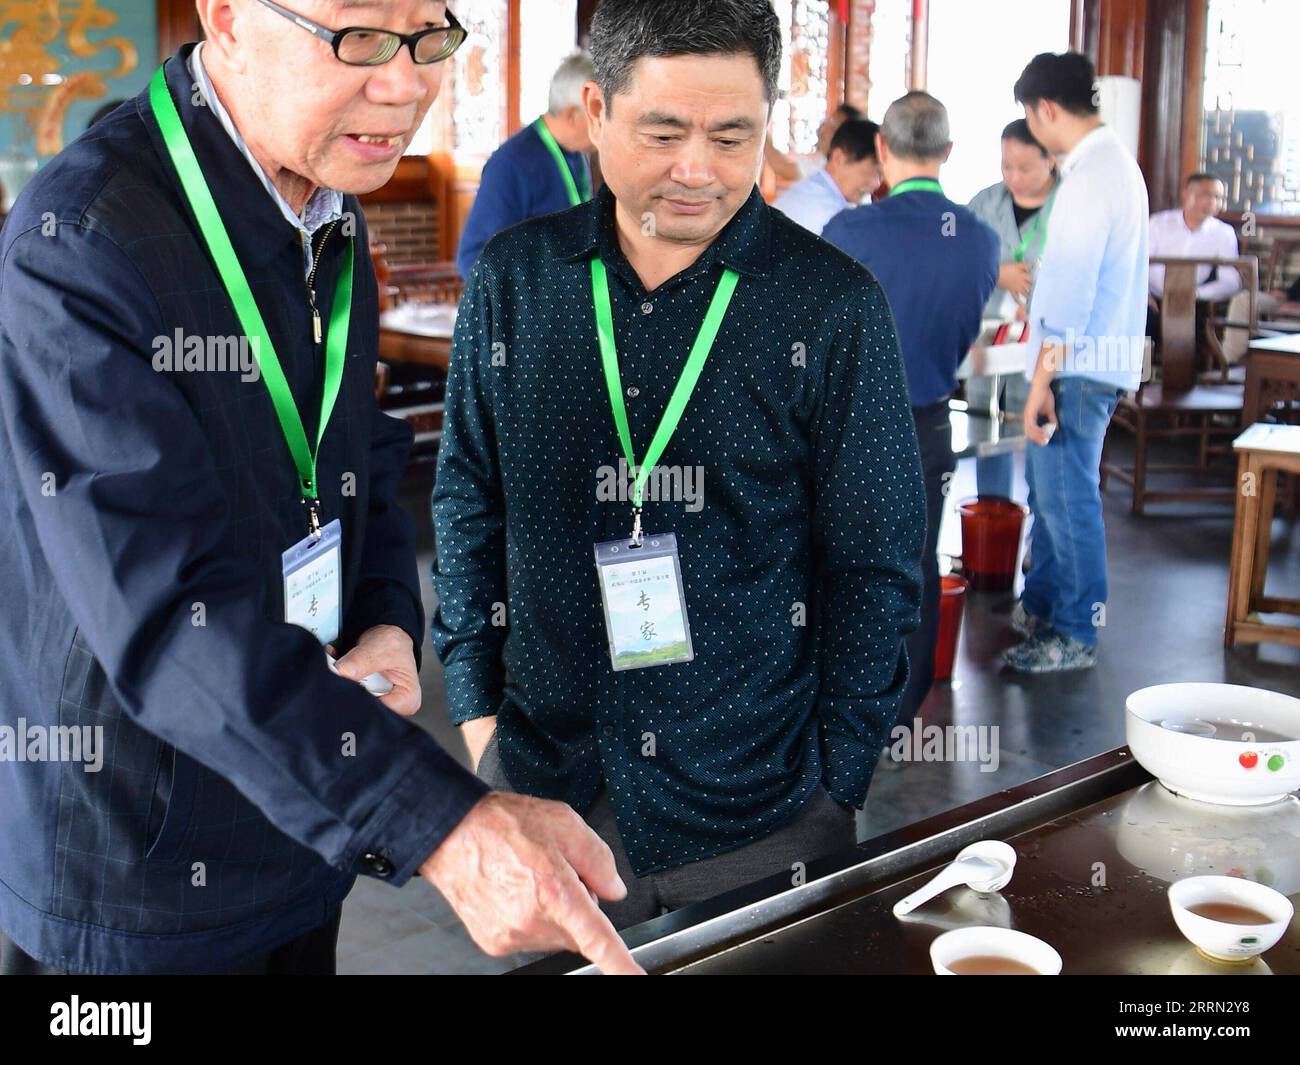 221202 -- WUYISHAN, Dec. 2, 2022 -- Ye Qitong 1st L, a national inheritor of Wuyi rock tea making technique, comments on tea at a tea tasting competition in Wuyishan, southeast China s Fujian Province, Oct. 28, 2017. Wuyishan, the hometown of rock tea, boasts a wide range of rock tea varieties. The making technique of Wuyi rock tea, a special oolong variety with a particularly roasted taste and floral and fruity aroma, is comprised of more than 10 processing procedures including tea harvesting, withering, fixation, twisting, drying and so on. Inherited and developed with a long history, the ma Stock Photo